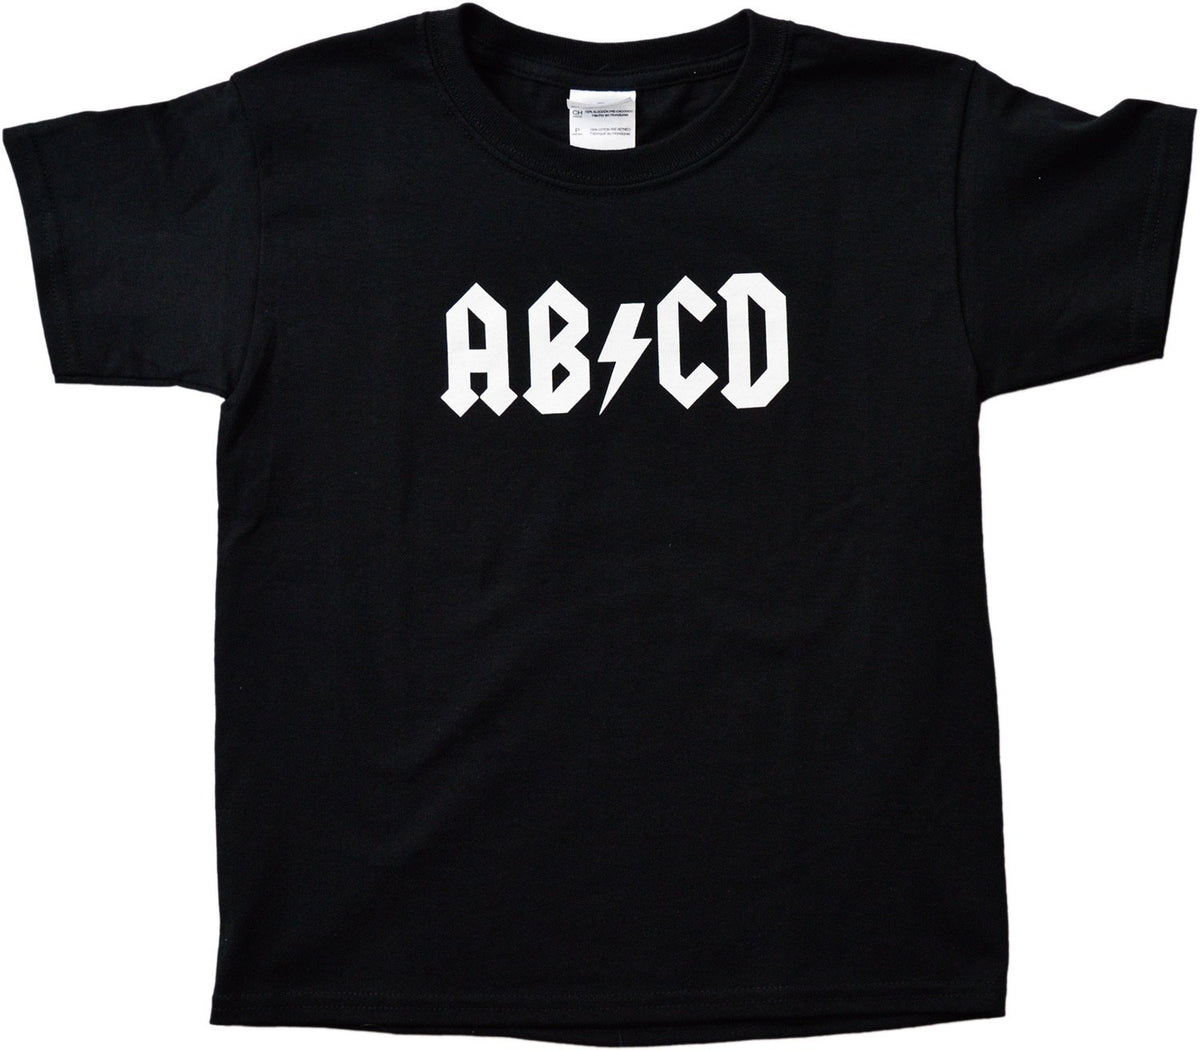 Ann Arbor T-shirt Co. Big Boys' "AB/CD" | Funny Toddler Rock and Roll Humor Tee